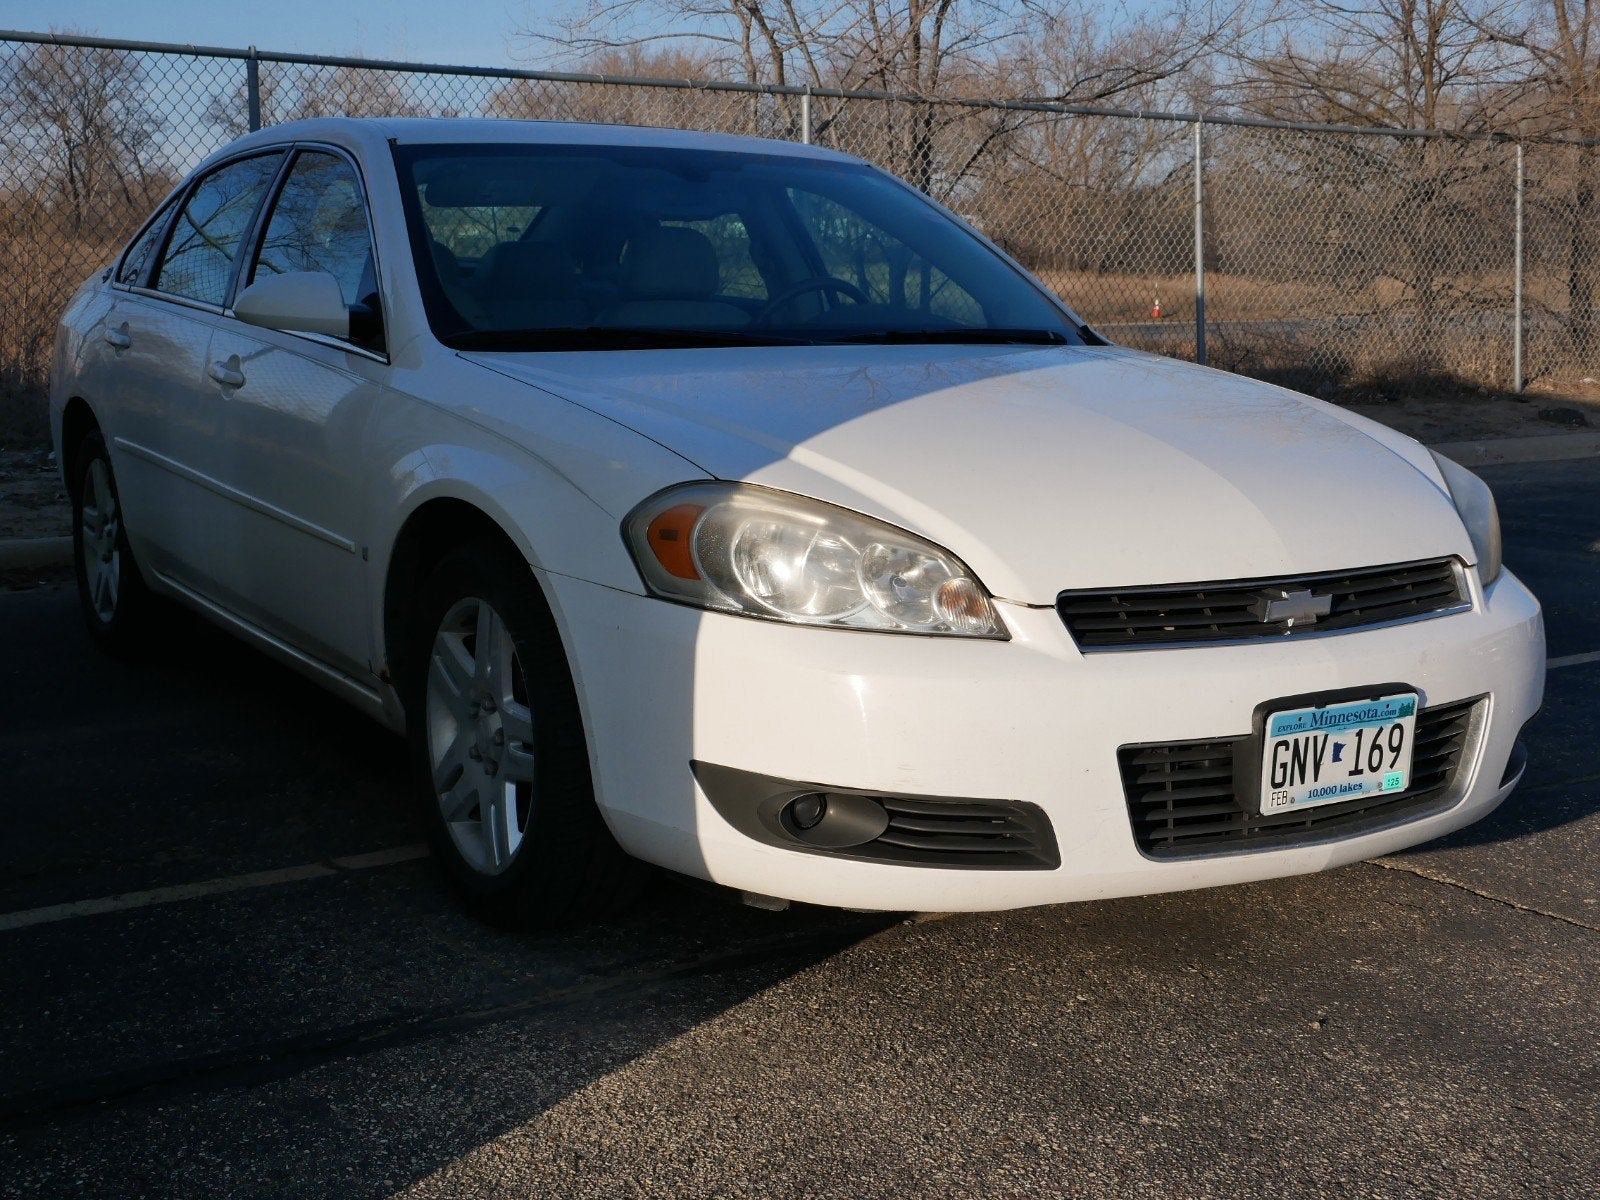 Used 2006 Chevrolet Impala LTZ with VIN 2G1WU581969184127 for sale in Fridley, Minnesota